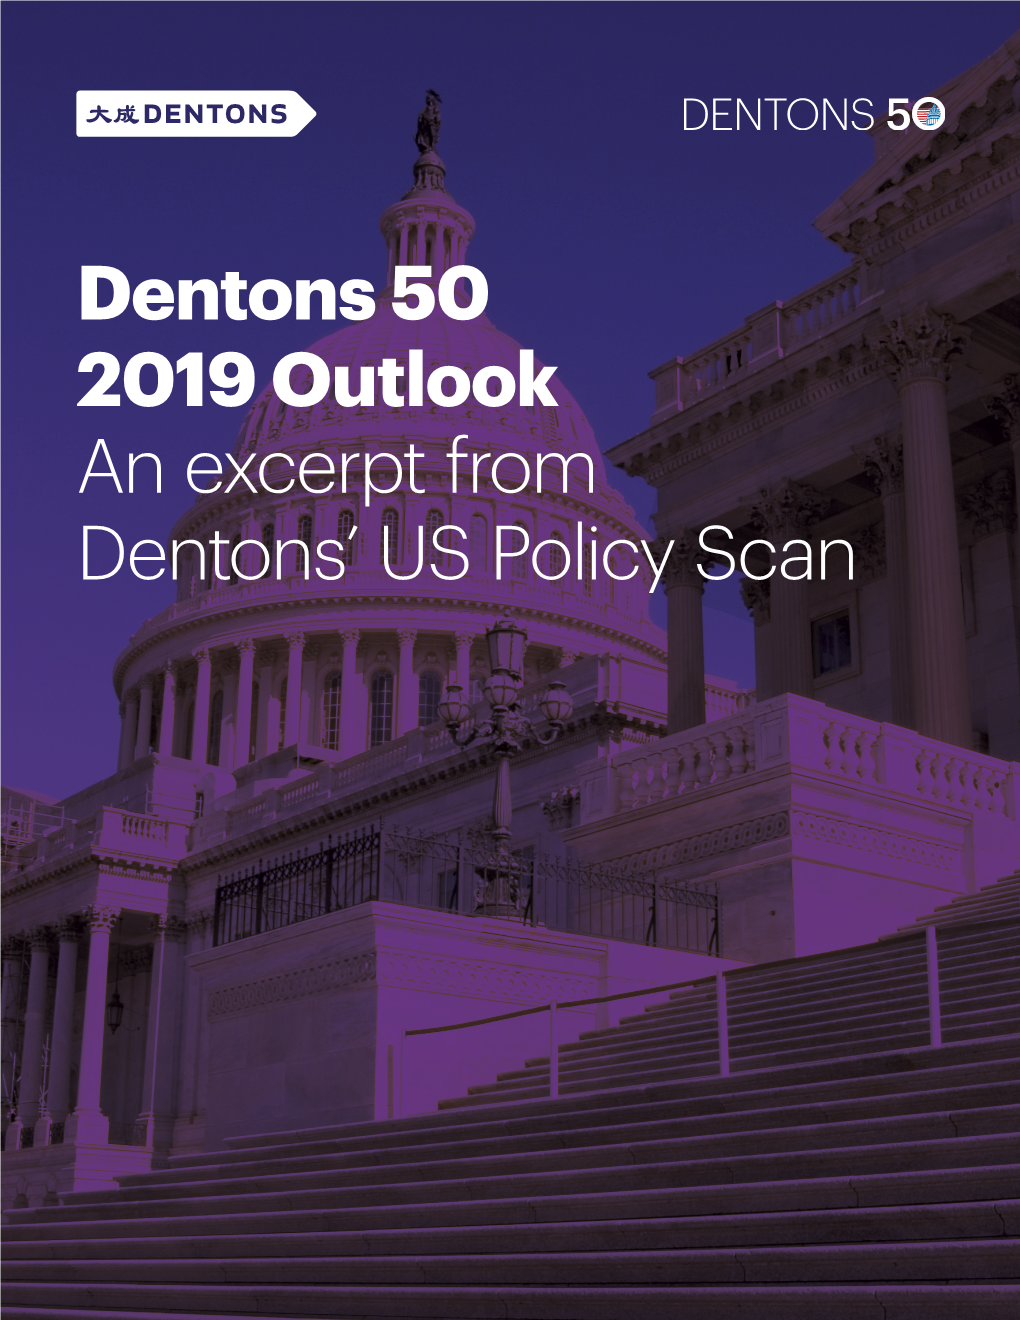 Dentons 50 2019 Outlook an Excerpt from Dentons' US Policy Scan